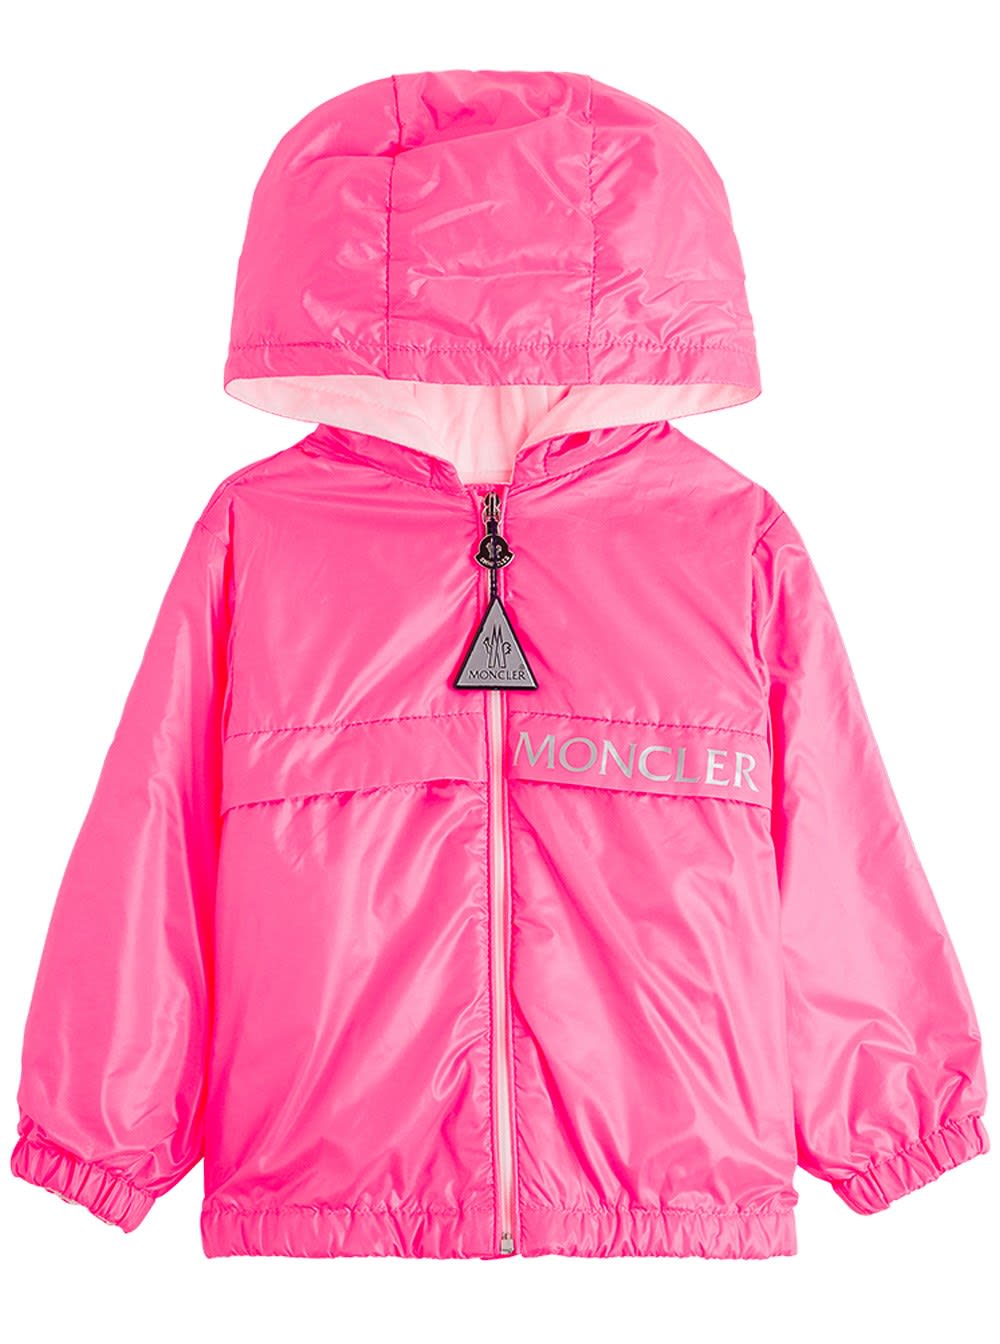 MONCLER ADMEDA JACKET IN PINK NYLON,1A7191054A8W52G